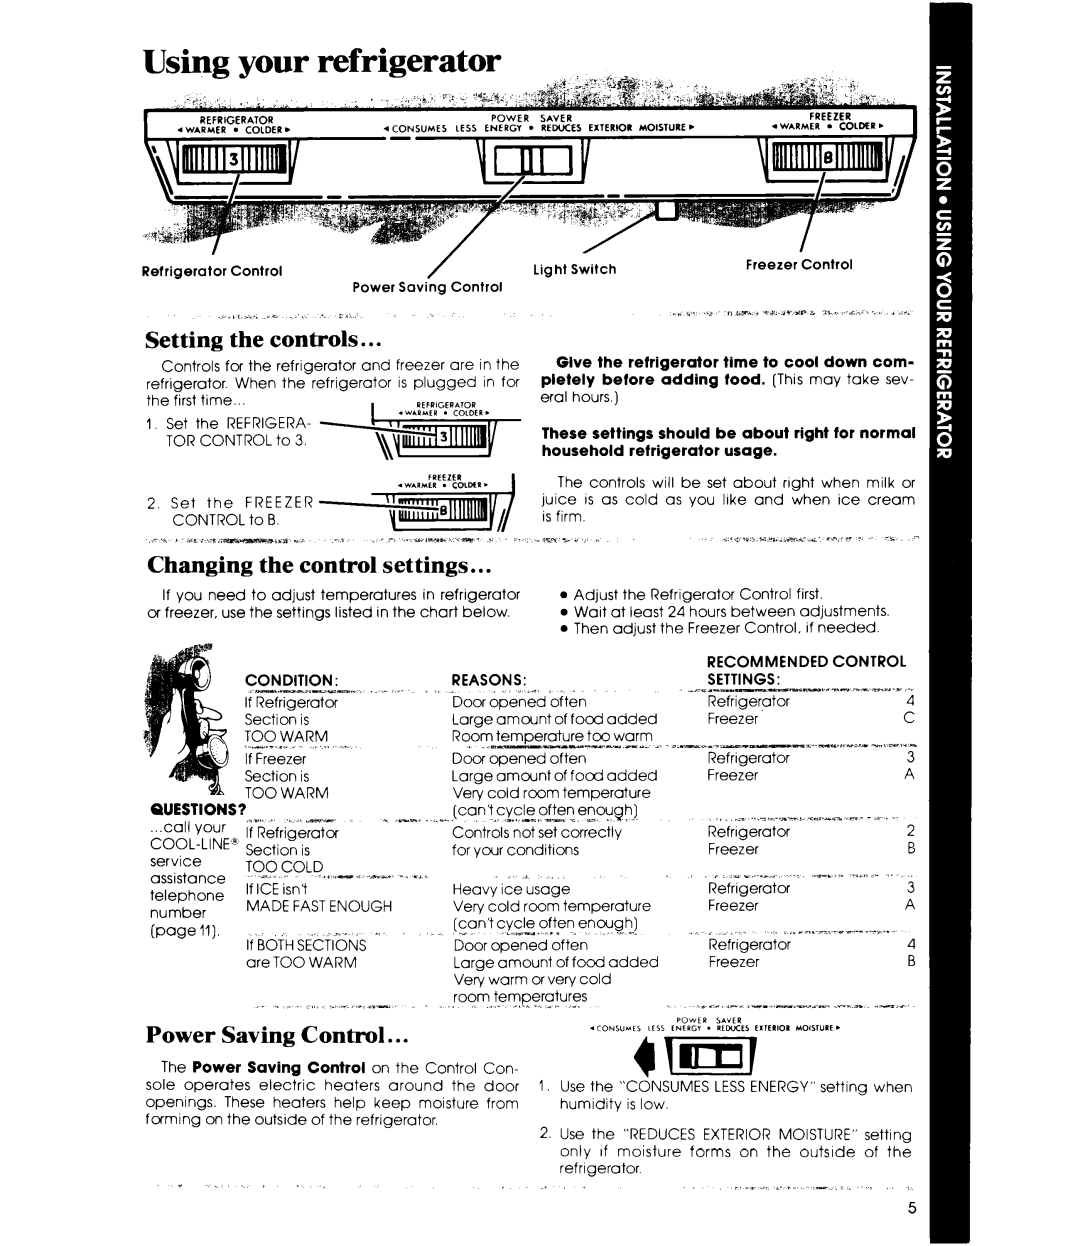 Whirlpool ET12AK manual Using your refrigerator, Setting the controls, Changing the control settings, Power Saving Control 